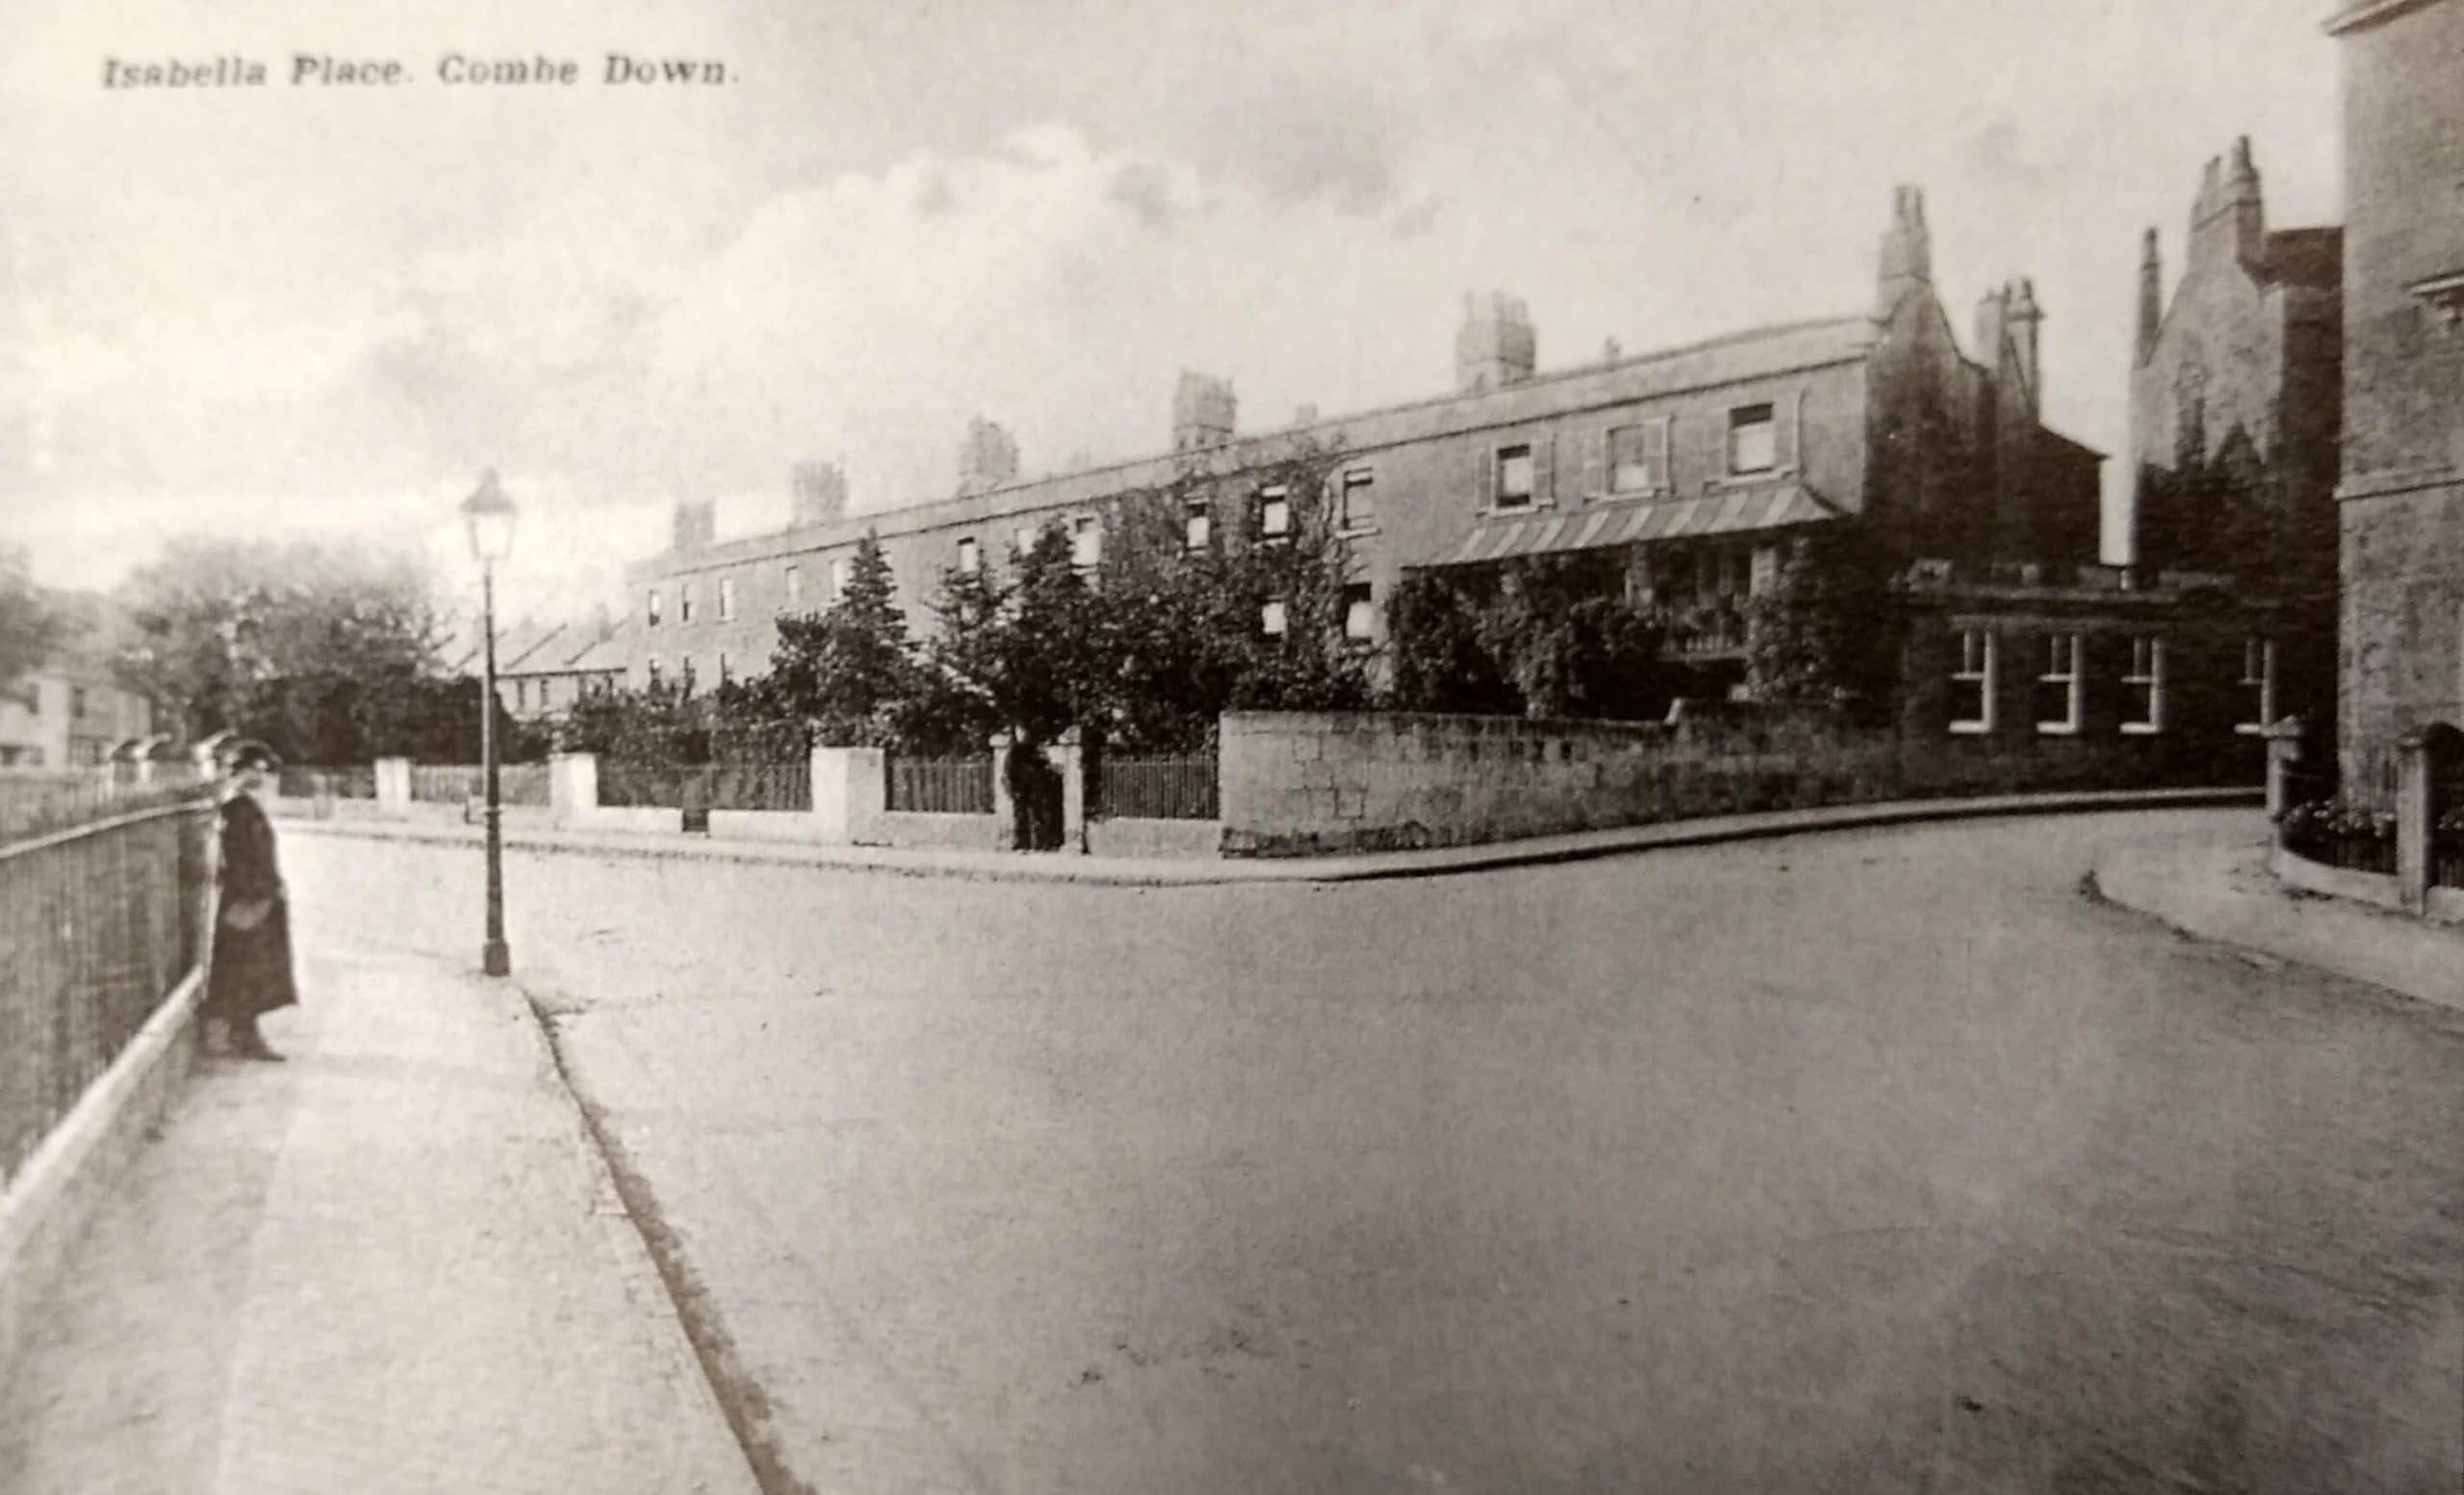 Isabella Place, Combe Down about 1910